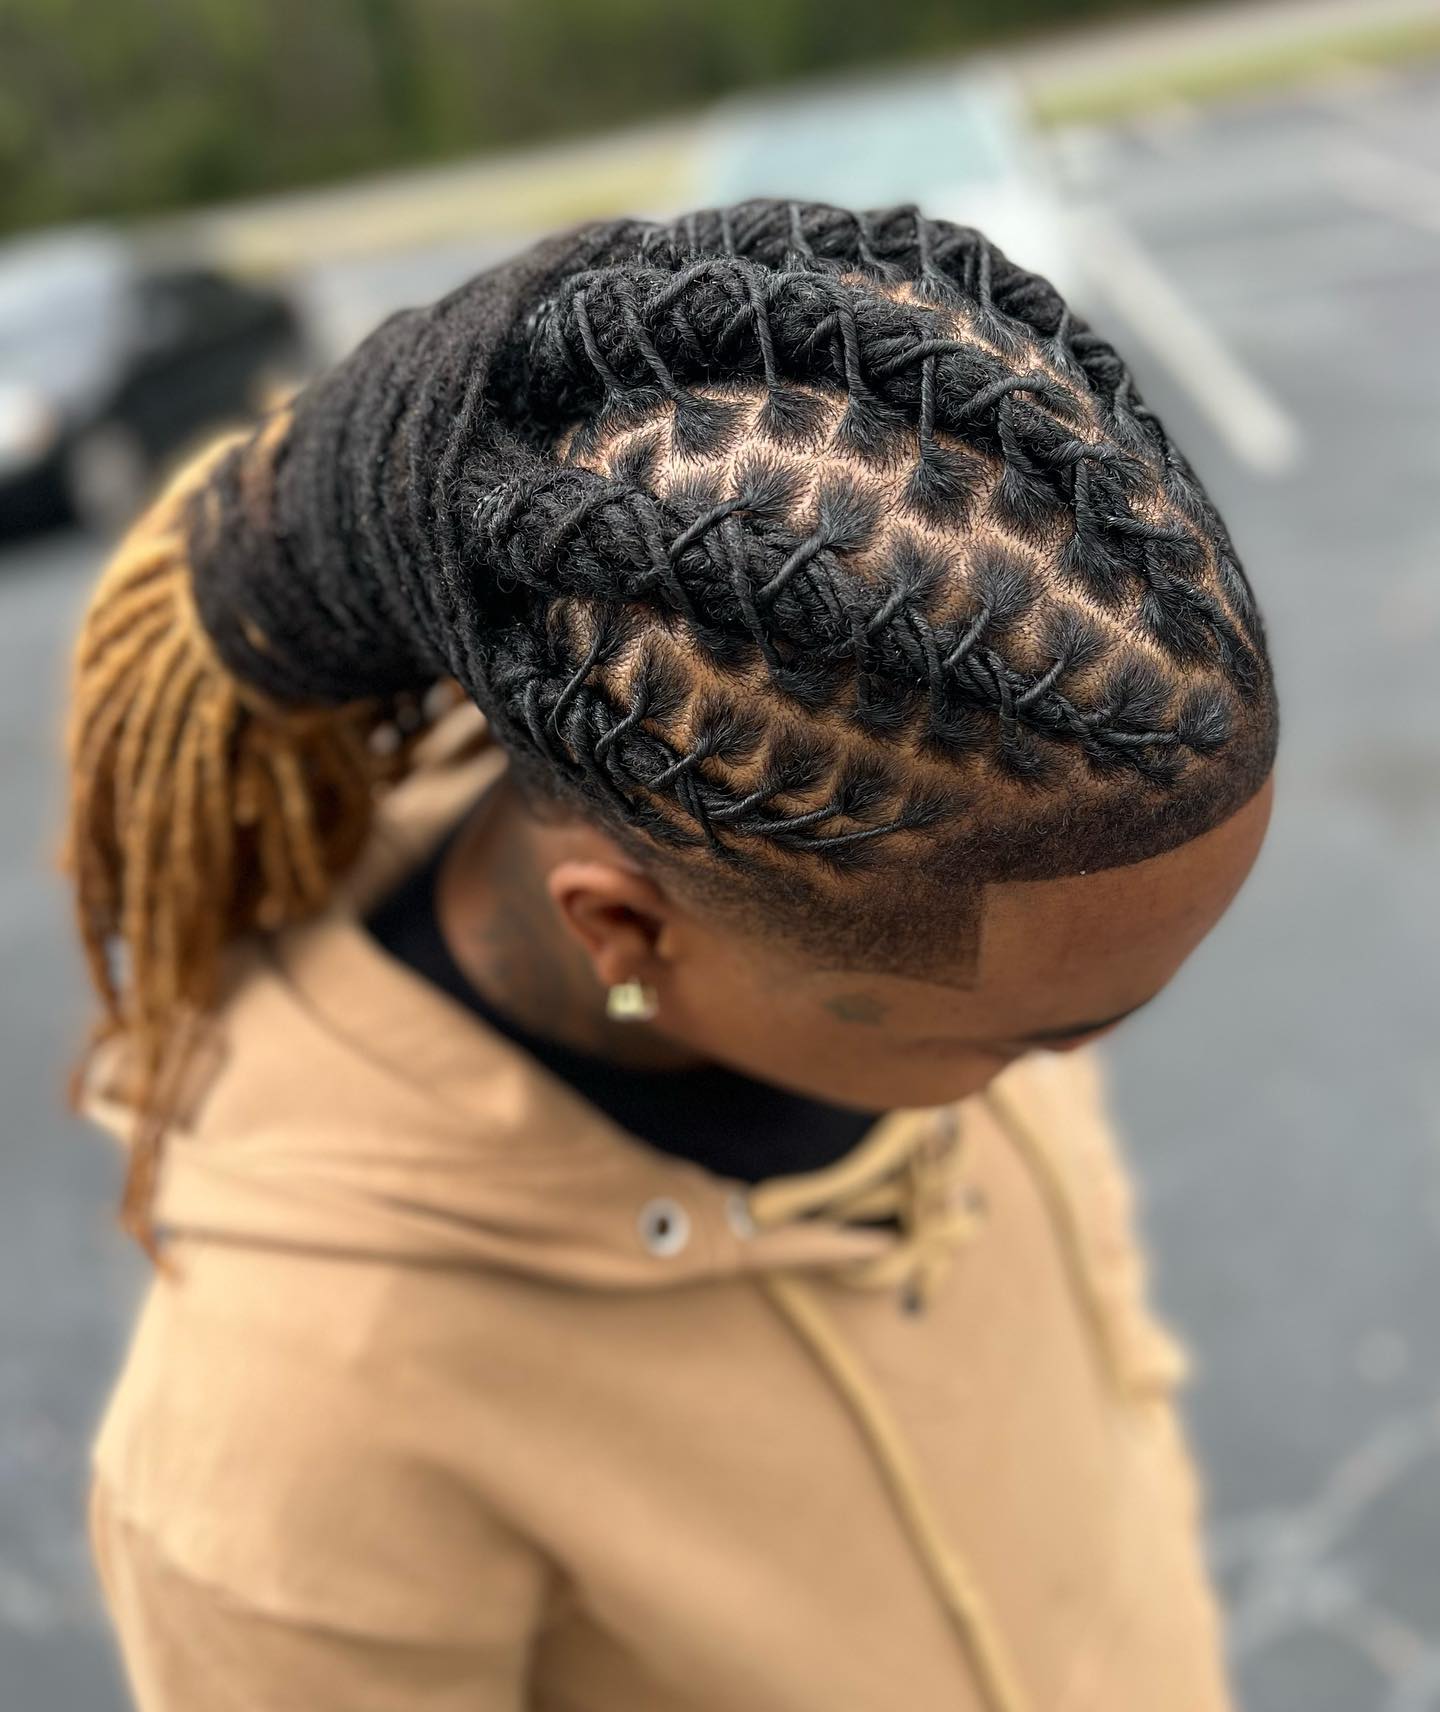 Image of Barrel Twists inspired by Dreadlock Hairstyles for Men